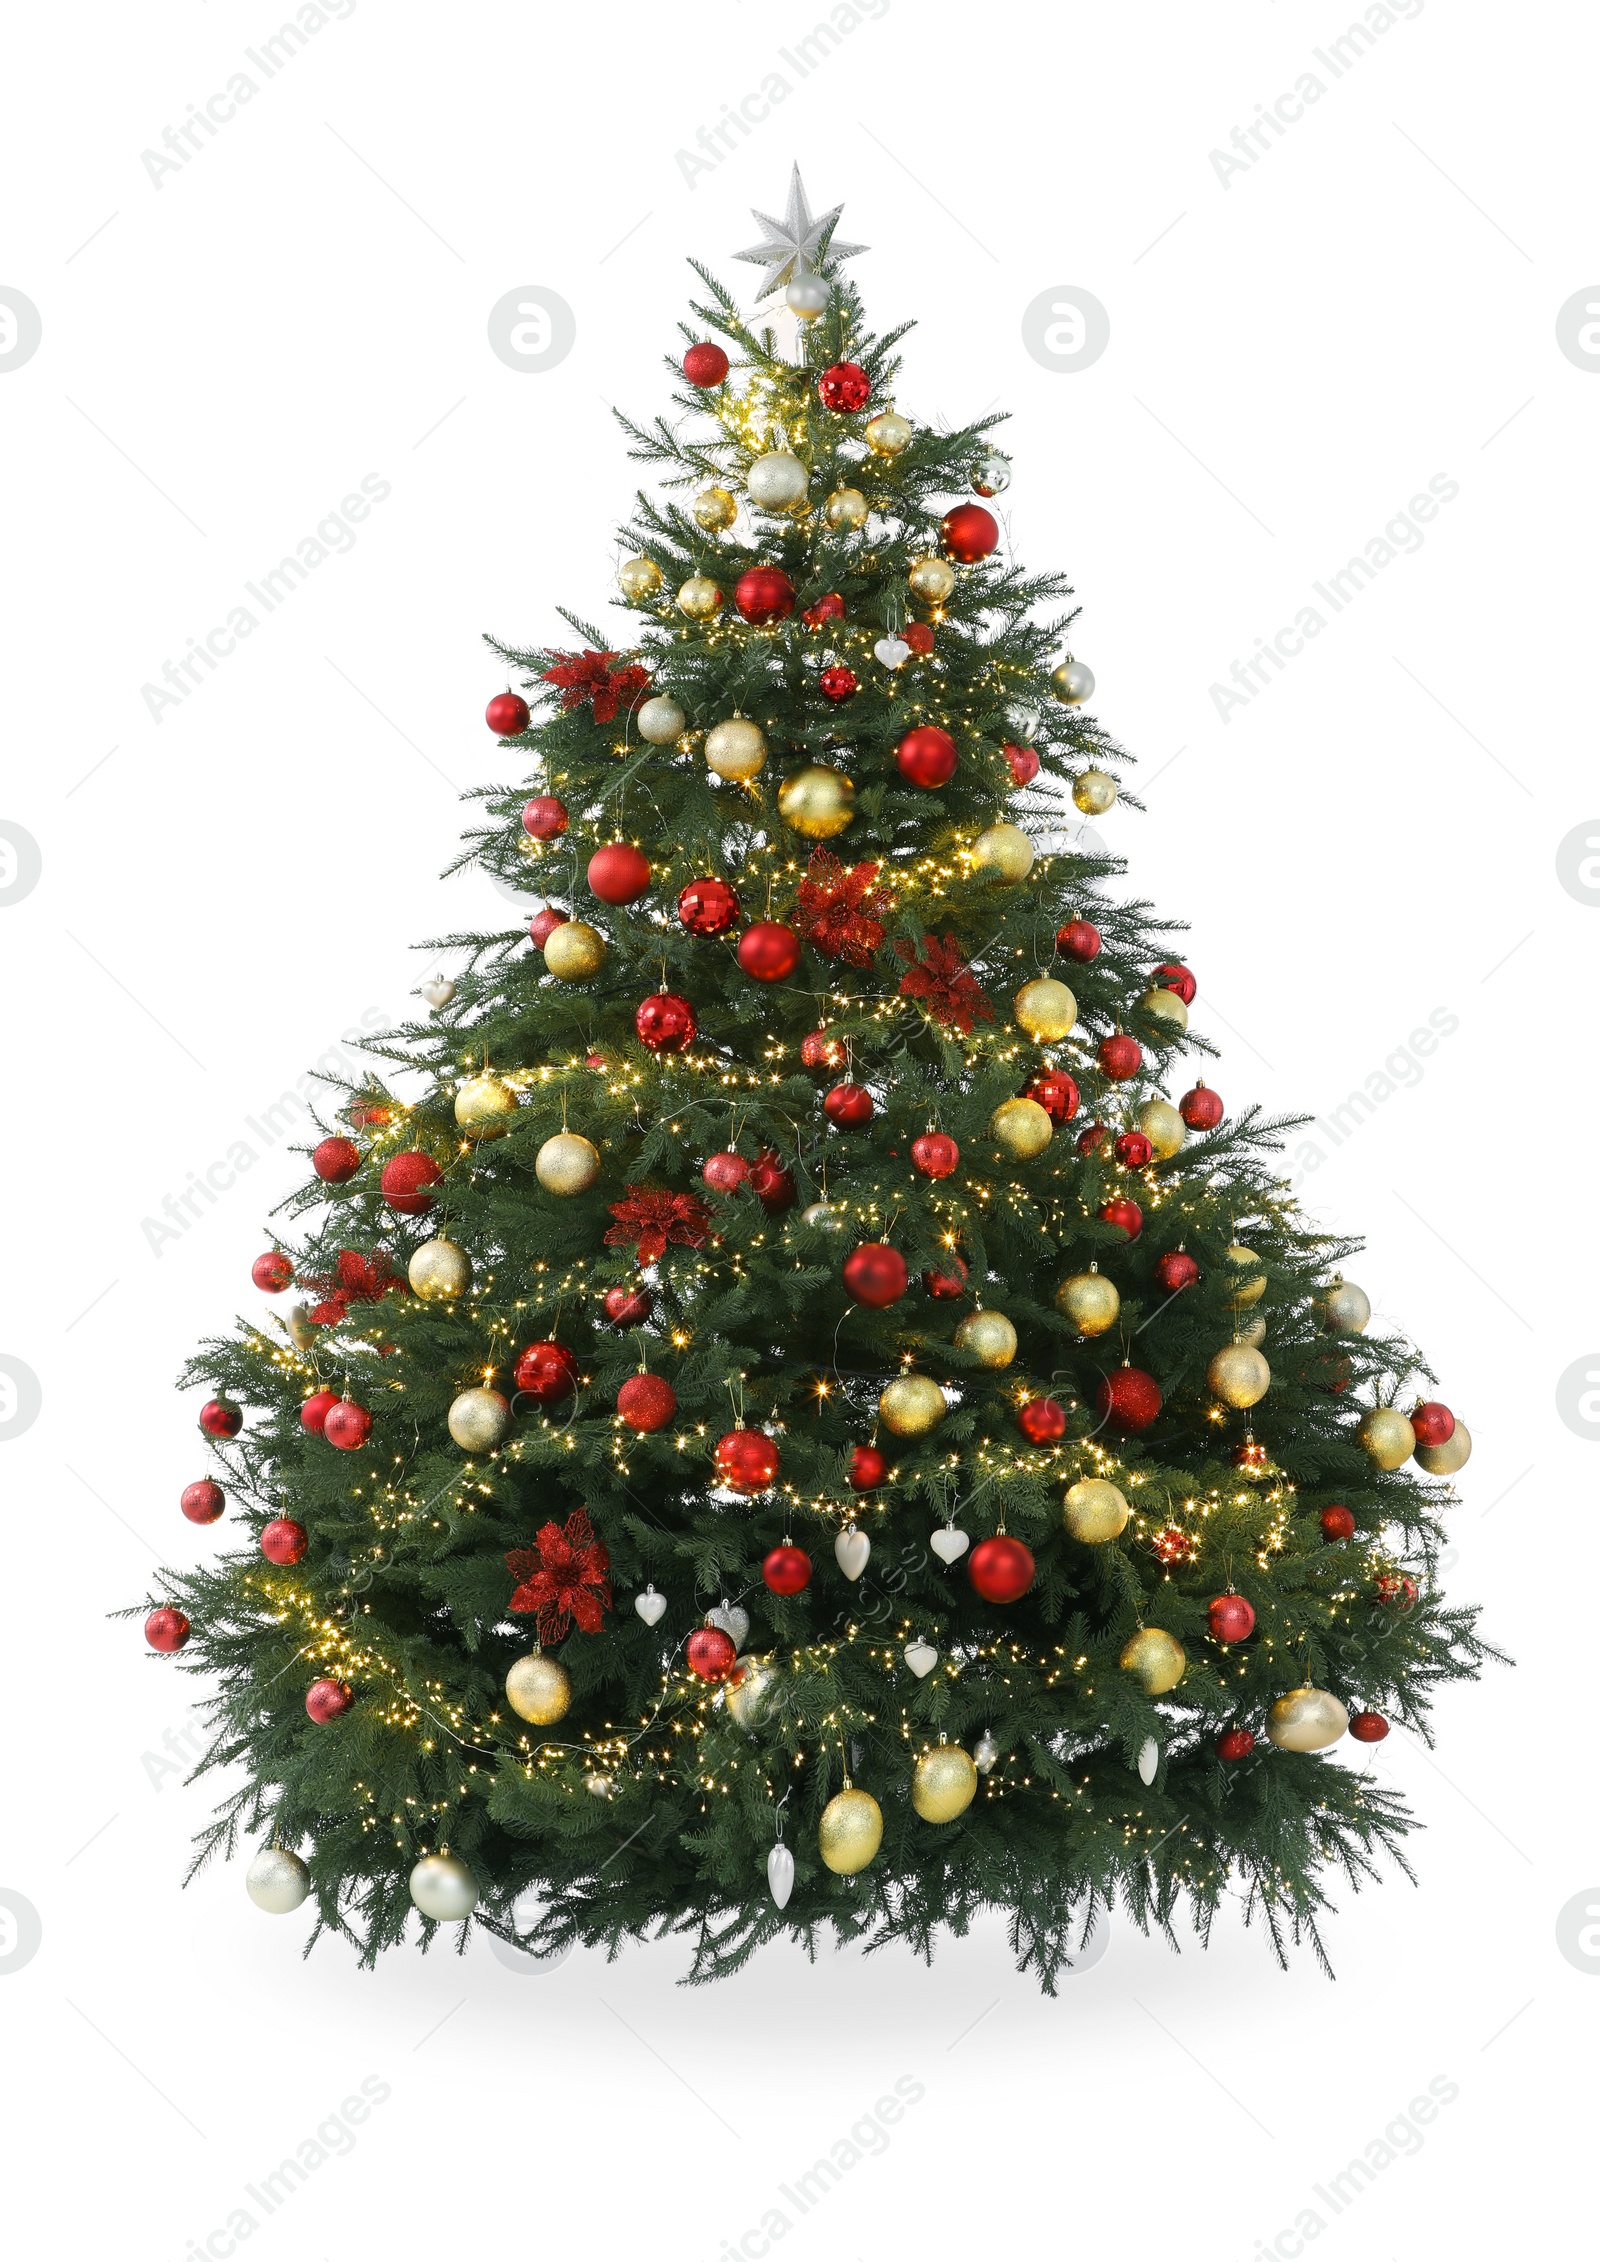 Photo of Beautiful Christmas tree decorated with festive lights and ornaments isolated on white